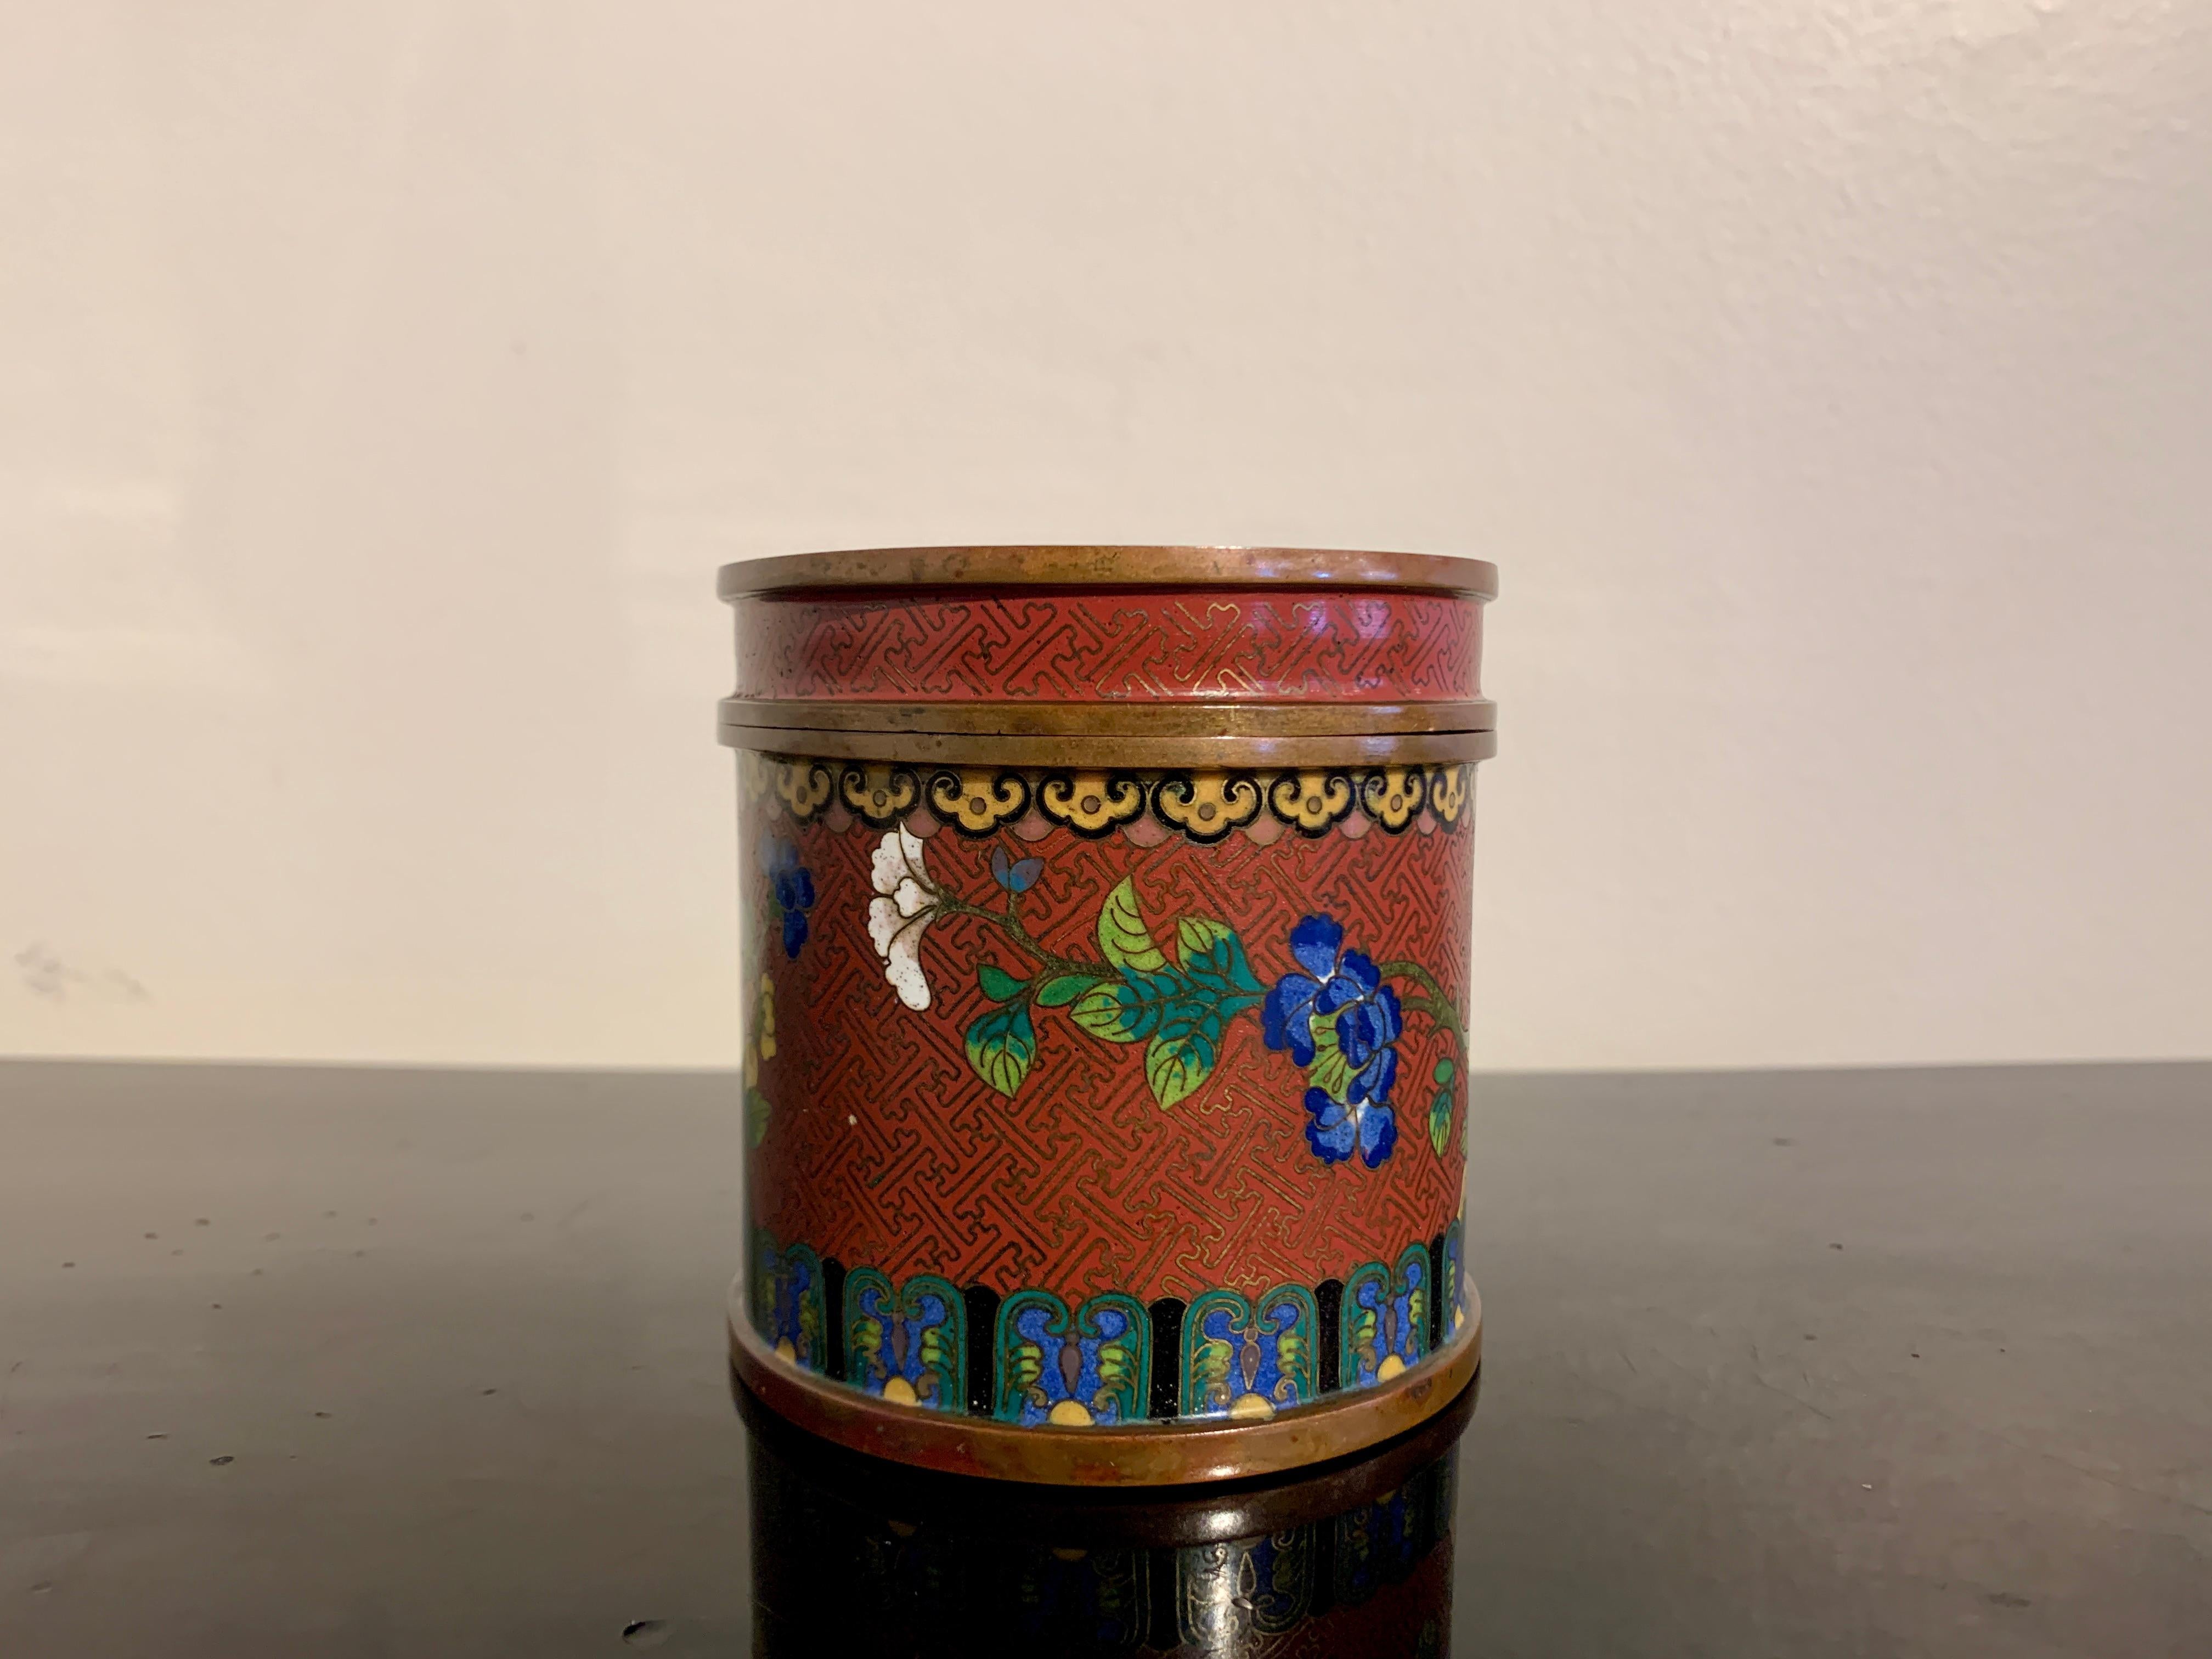 Cloissoné Chinese Lao Tian Li Cloisonne Cylindrical Box, Late Qing Dynasty, China For Sale